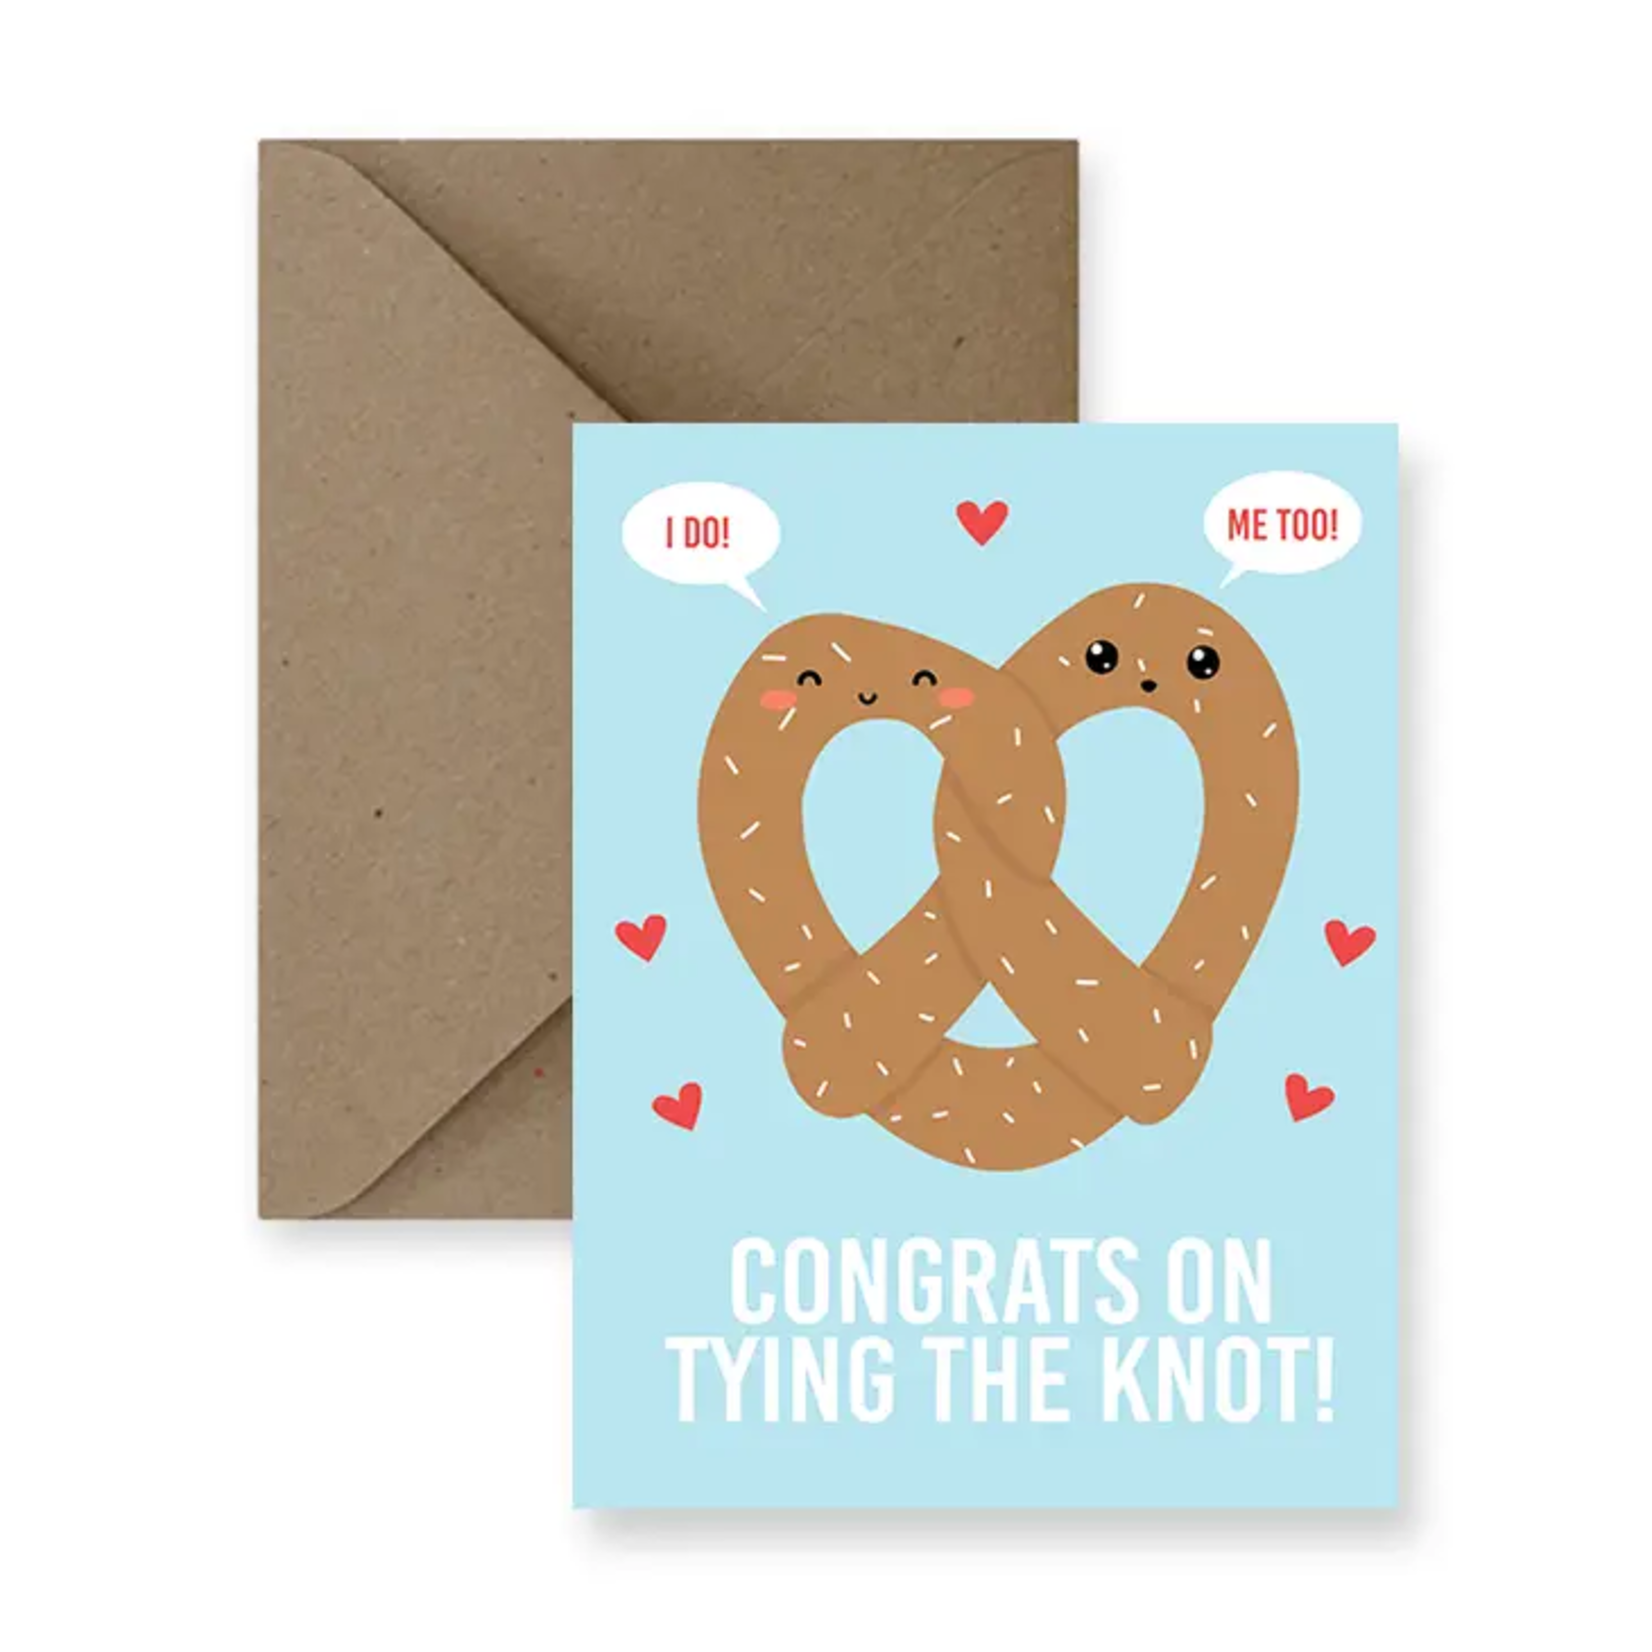 Congrats Tying The Knot - Wedding Card